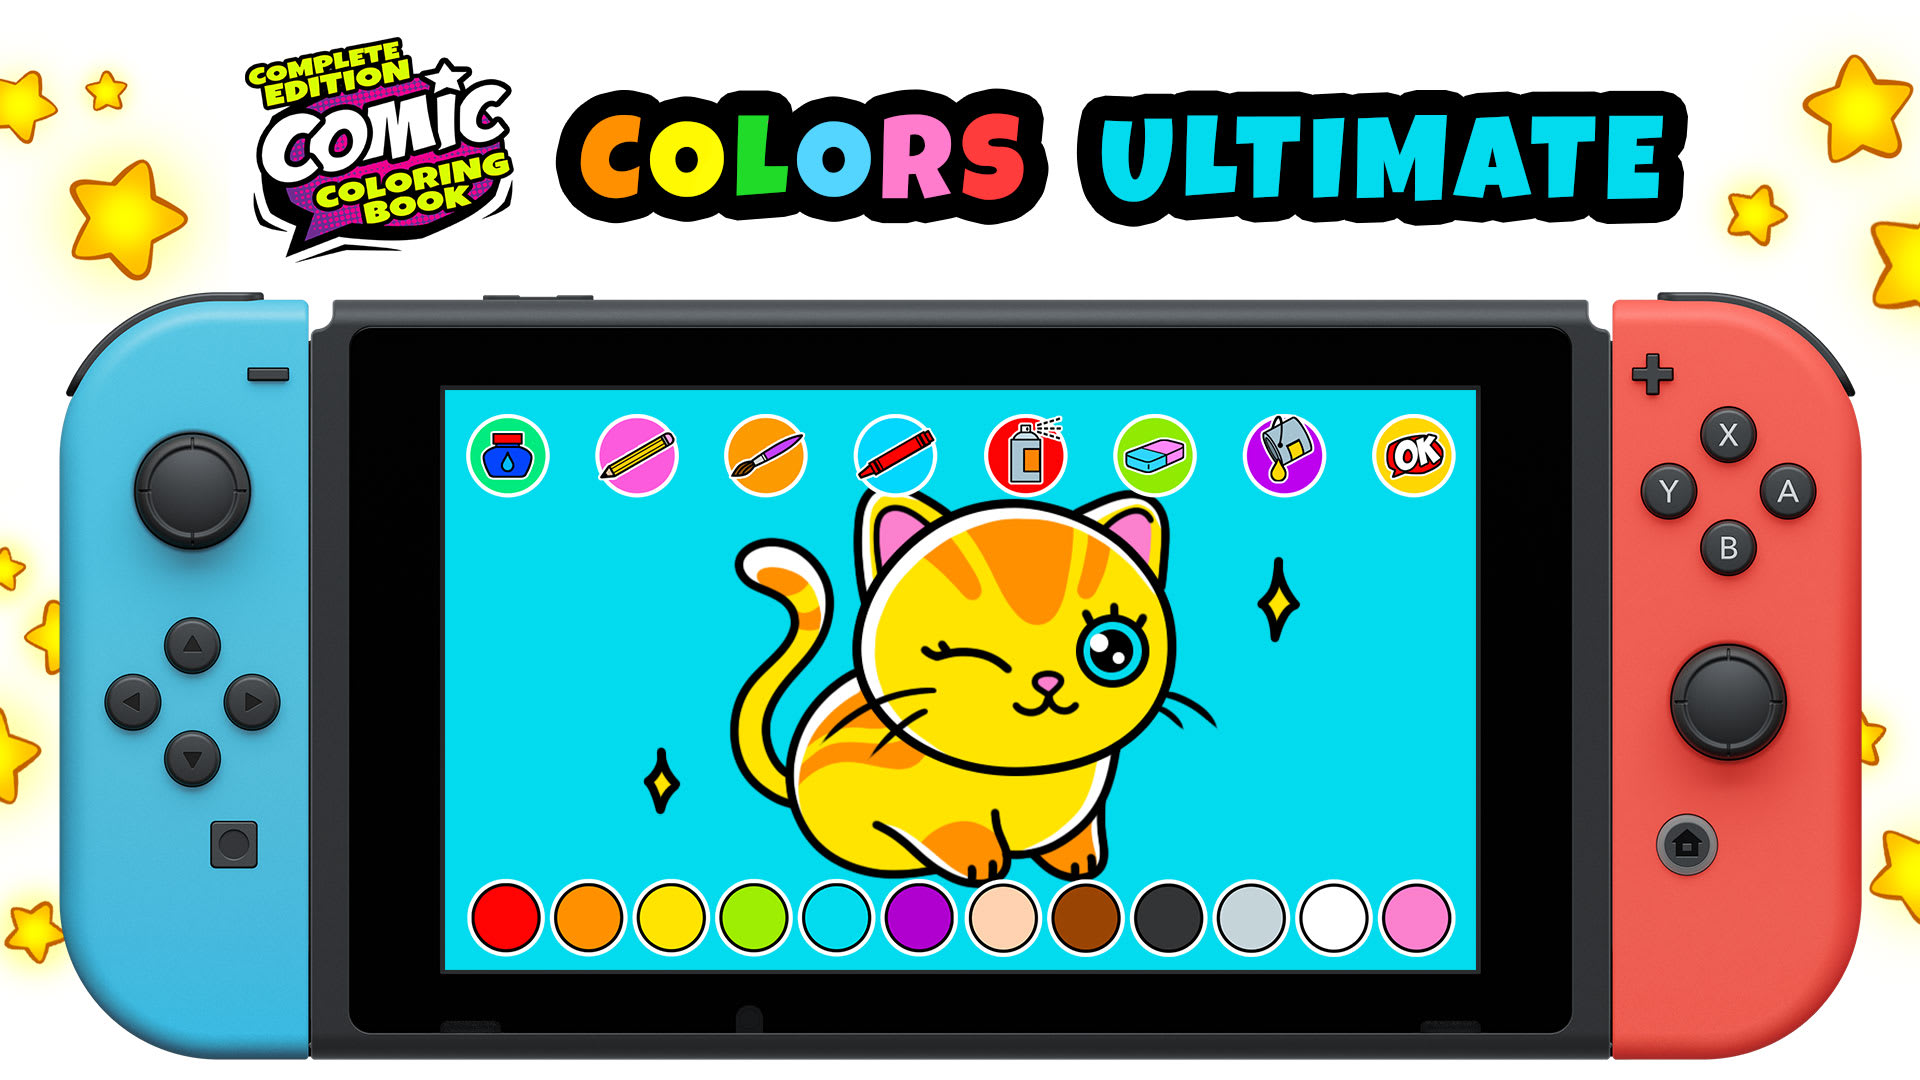 Comic Coloring Book Complete Edition: COLORS Ultimate